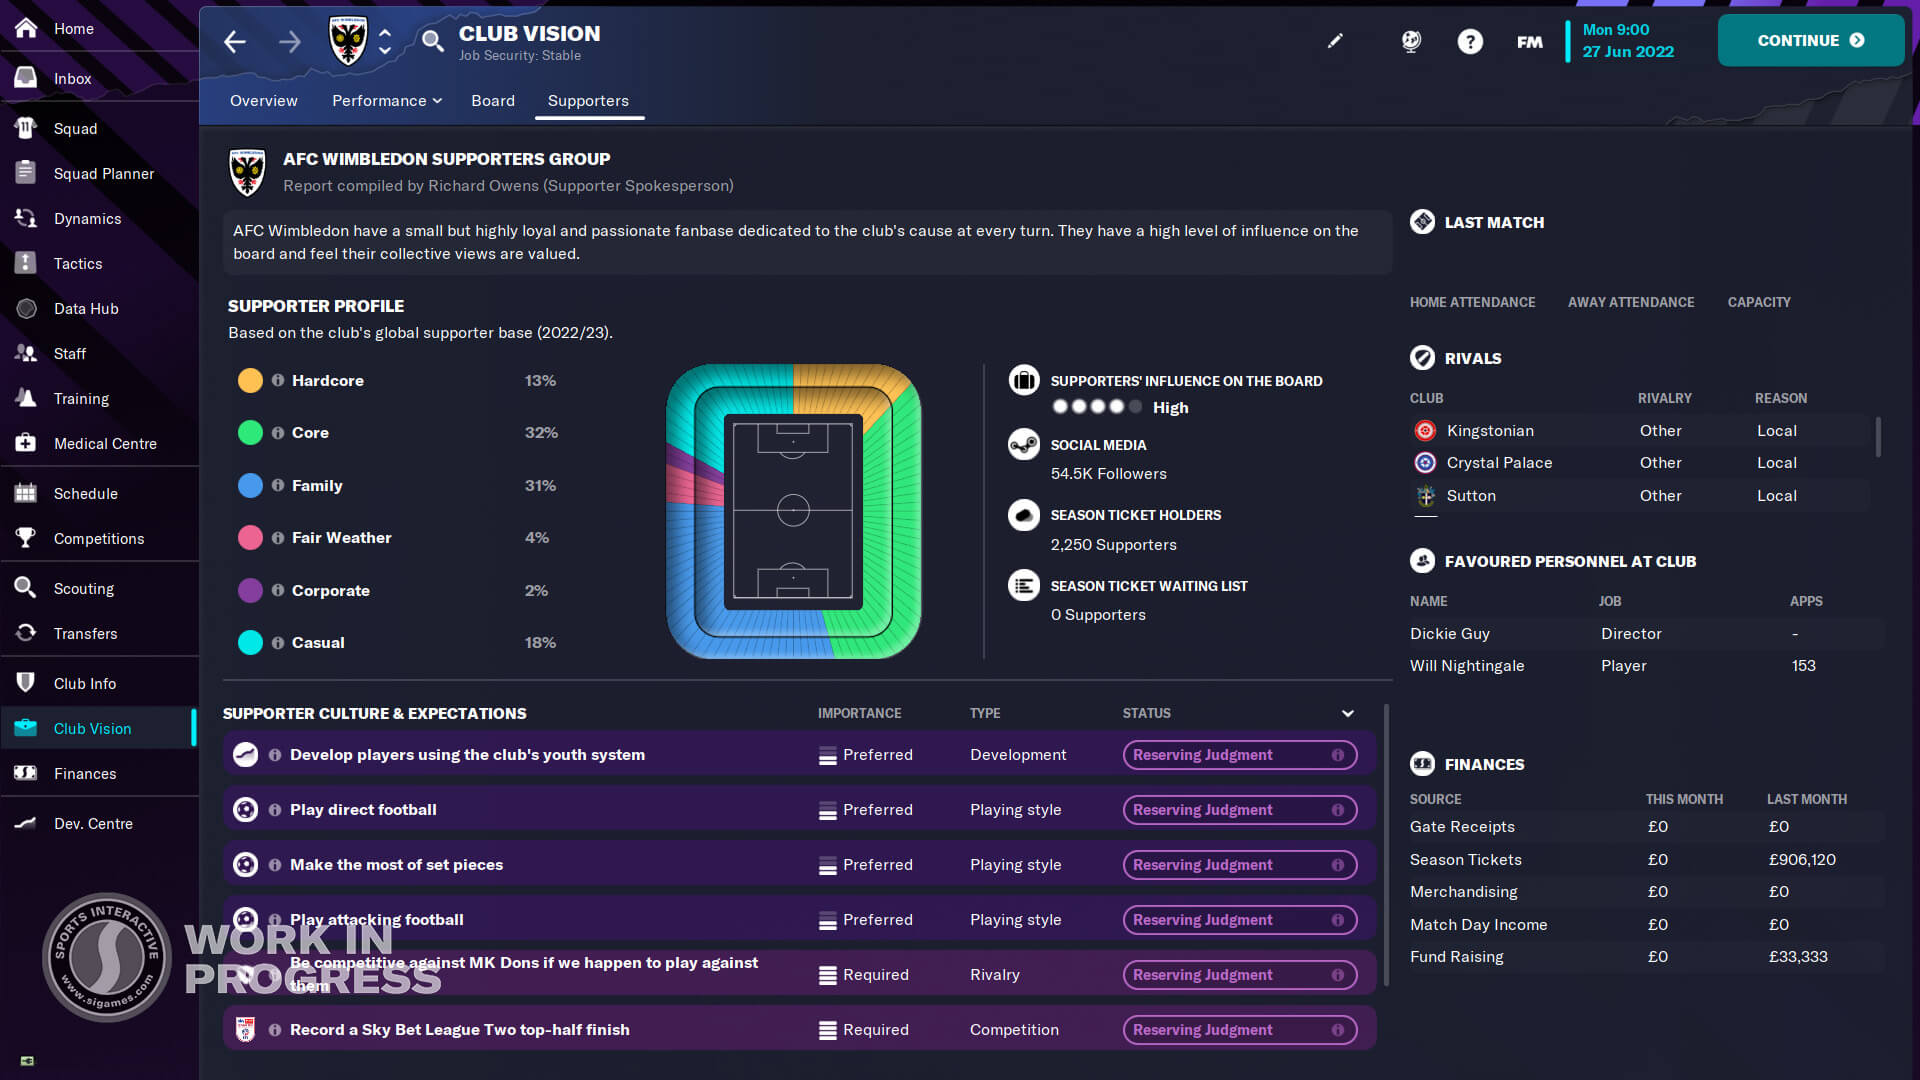 Football Manager 2023 beta release date & how to get early access to the  new game